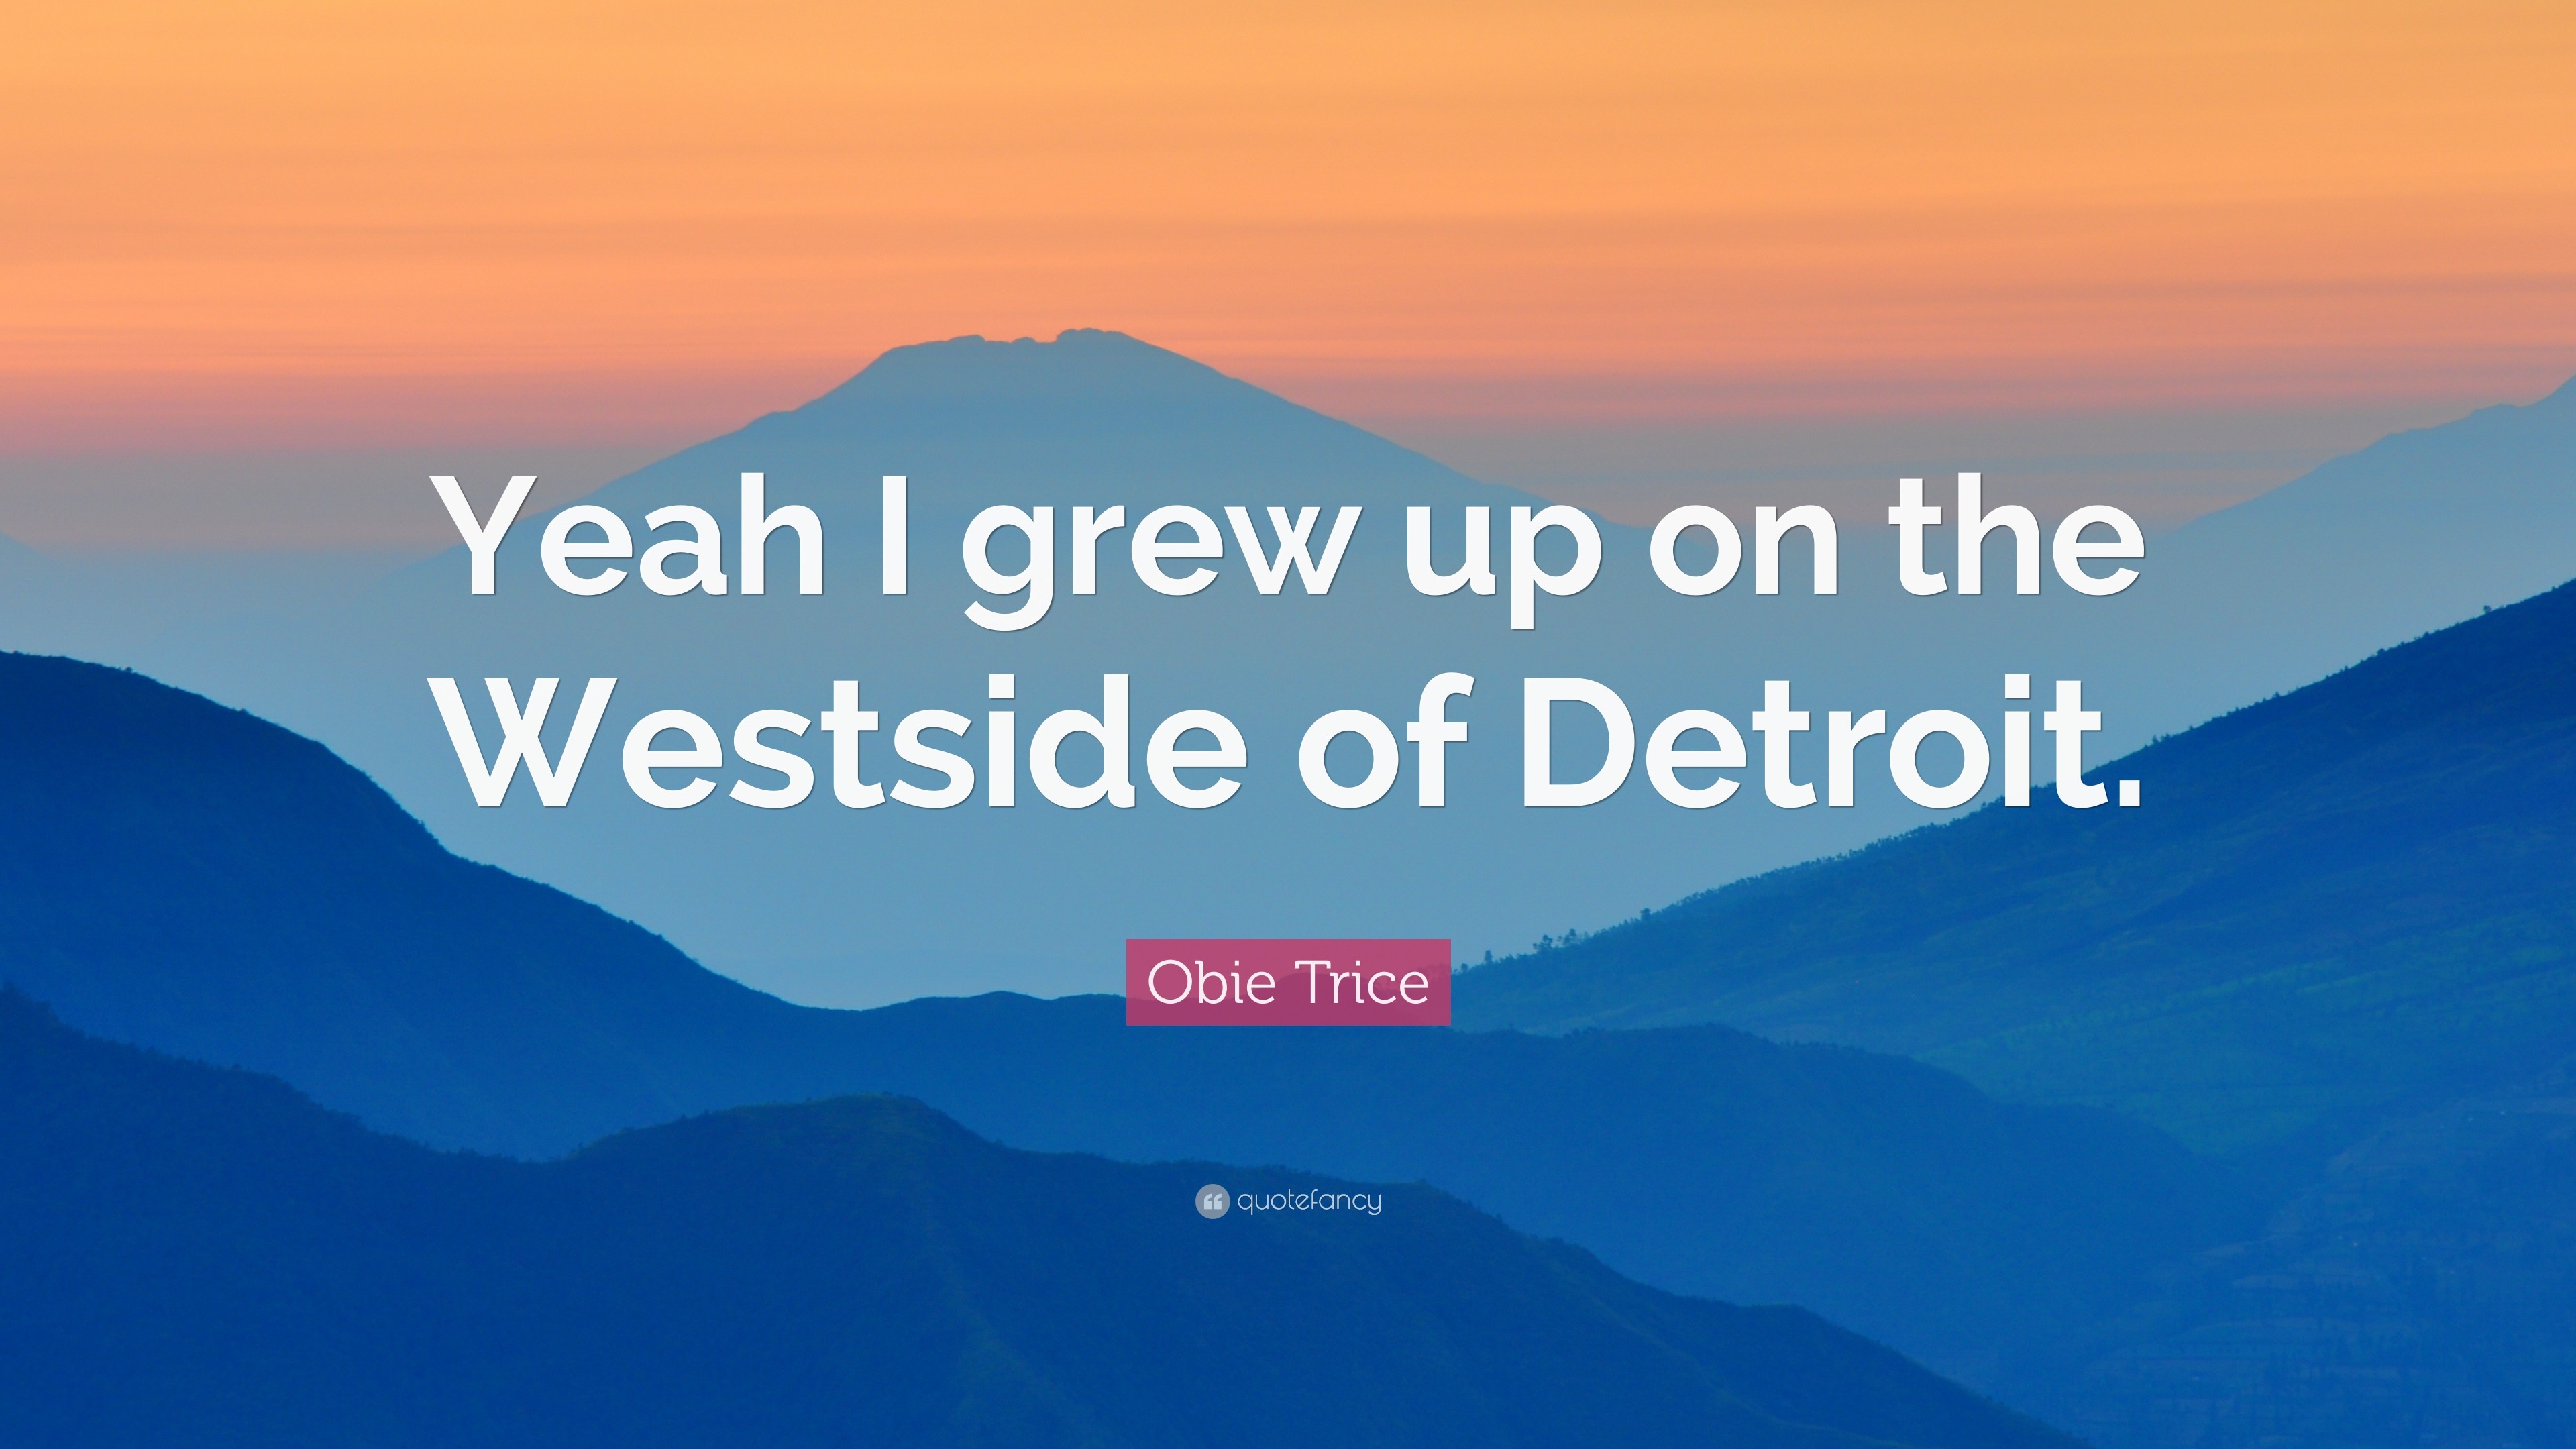 3840x2160 Obie Trice Quote: “Yeah I grew up on the Westside of Detroit.”